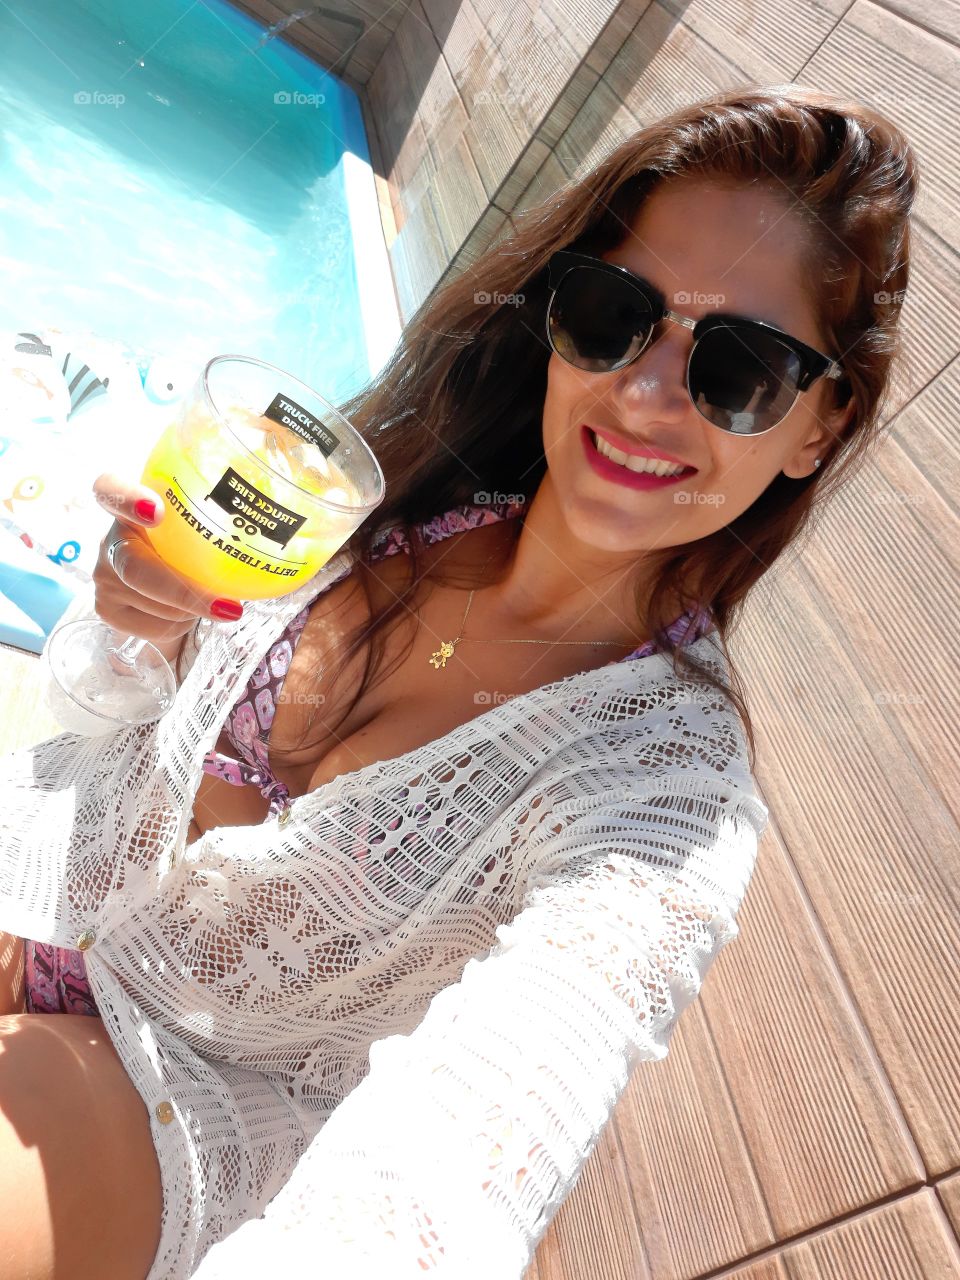 woman at the edge of the pool with glass of drink in her hand.